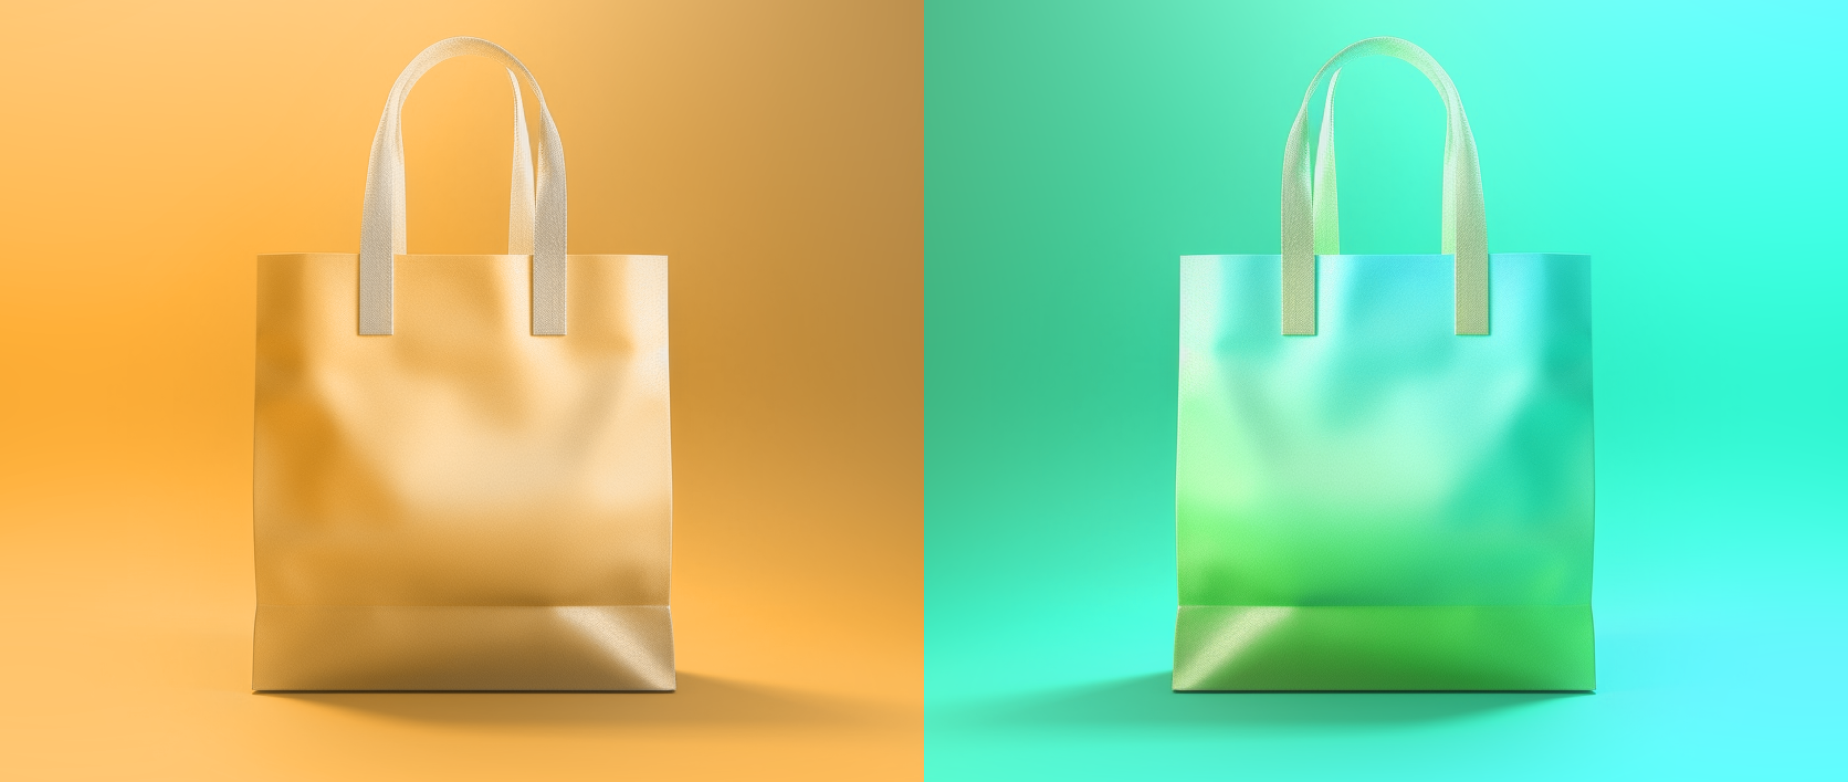 Two shopping bags on a colorblocked background